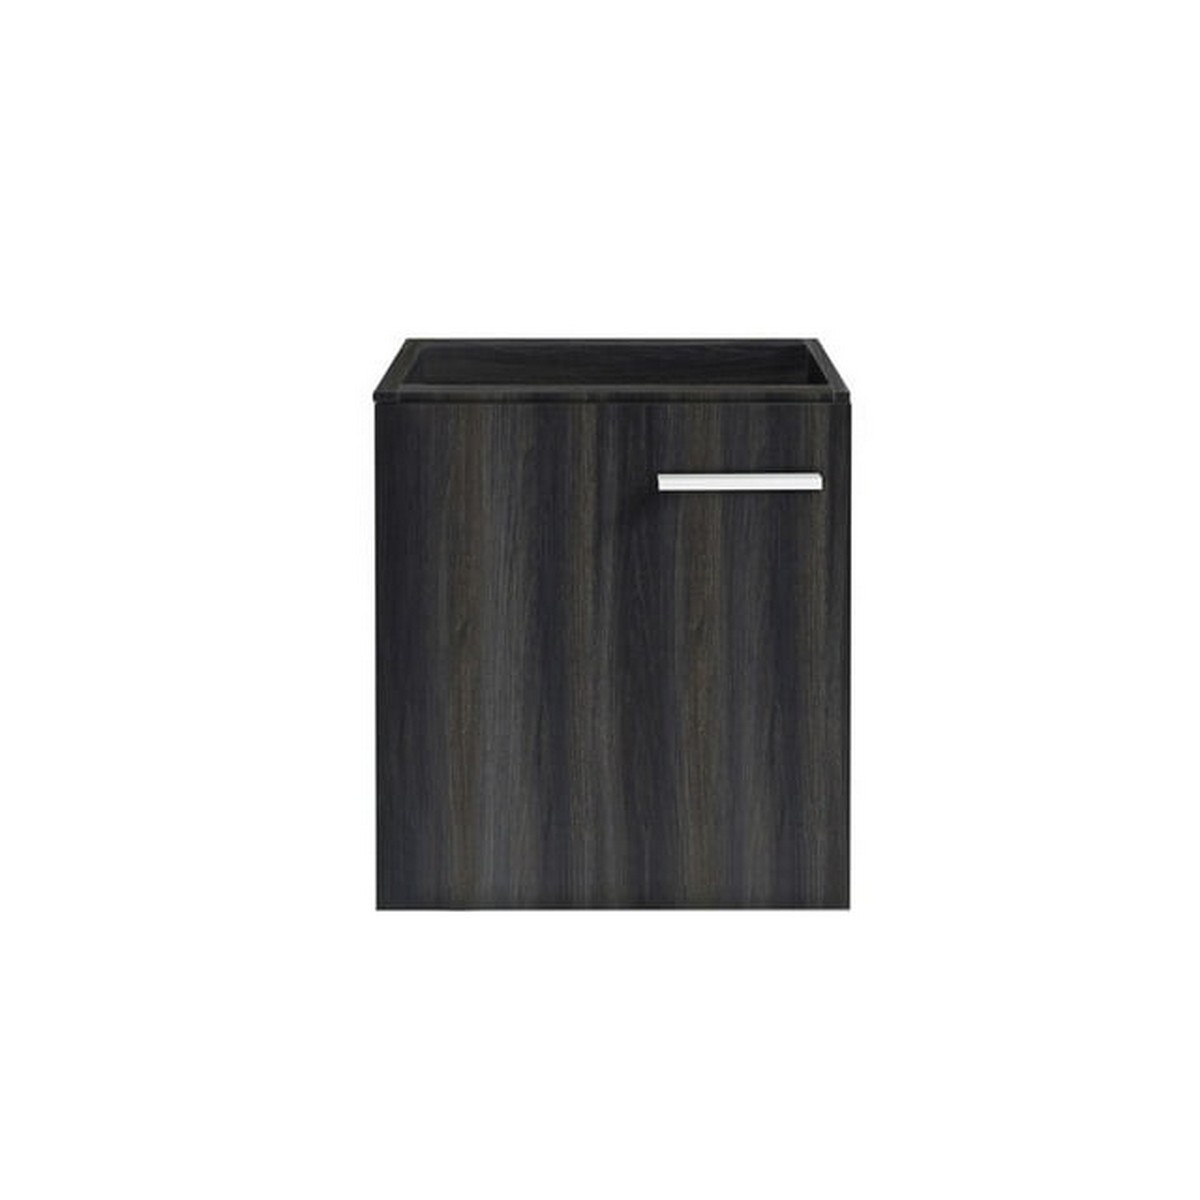 SWISS MADISON SM-BV6-C COLMER 18 1/2 INCH WALL MOUNTED SINGLE SINK BATHROOM VANITY CABINET ONLY